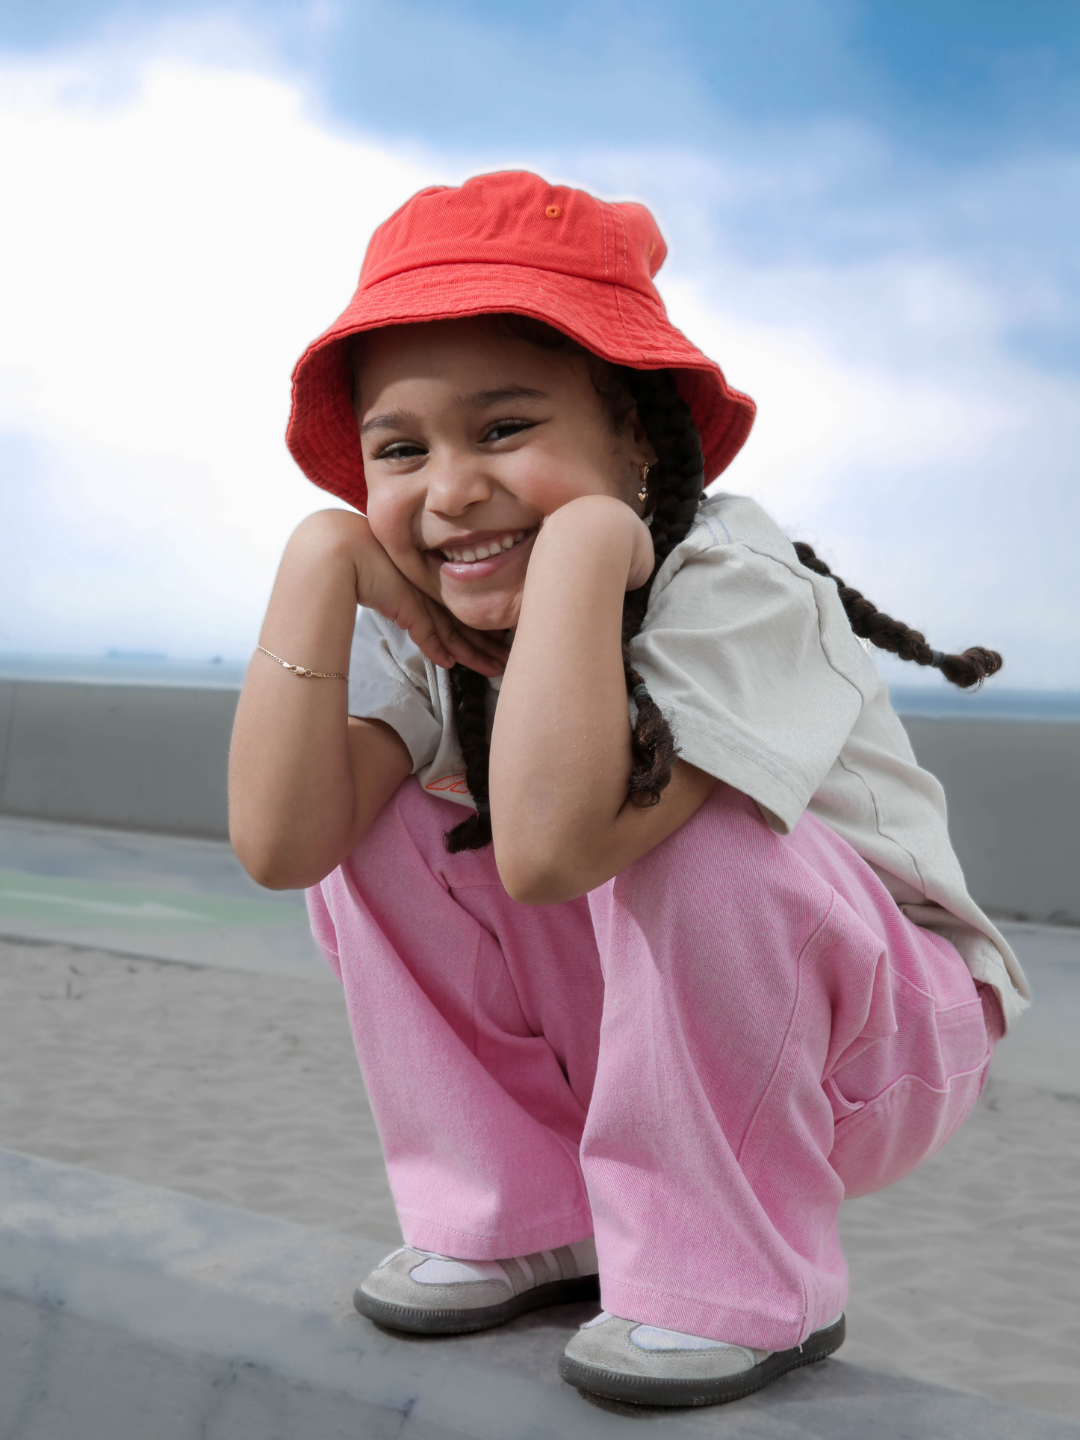 A smiling girl wearing the orange picnic bucket hat, with her hair in braids. She is squatting in pink jeans and an off-white t-shirt, and off-white sneakers, with blue sky behind her.